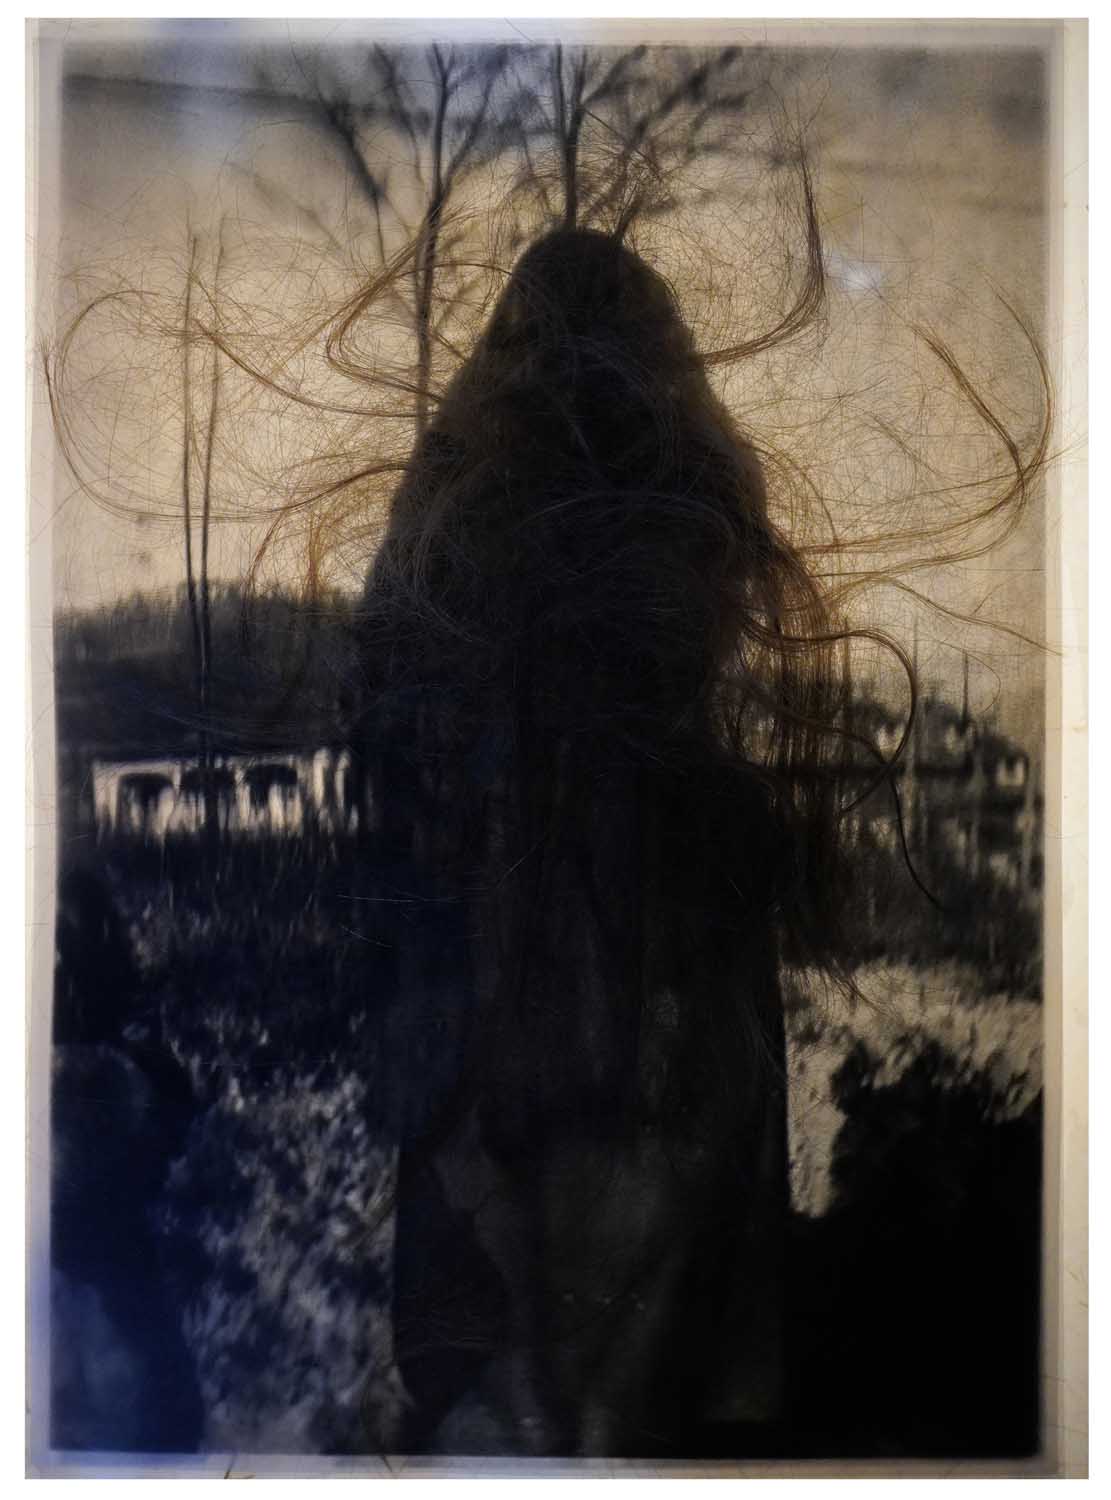 André Werner, Her Hair V a, 2023. Installation based photograph. Fine Art print on Arches cotton rag 310, Edition of 5 | 2 AP, 40 x 30 cm (print), 50 x 40 cm (framed)